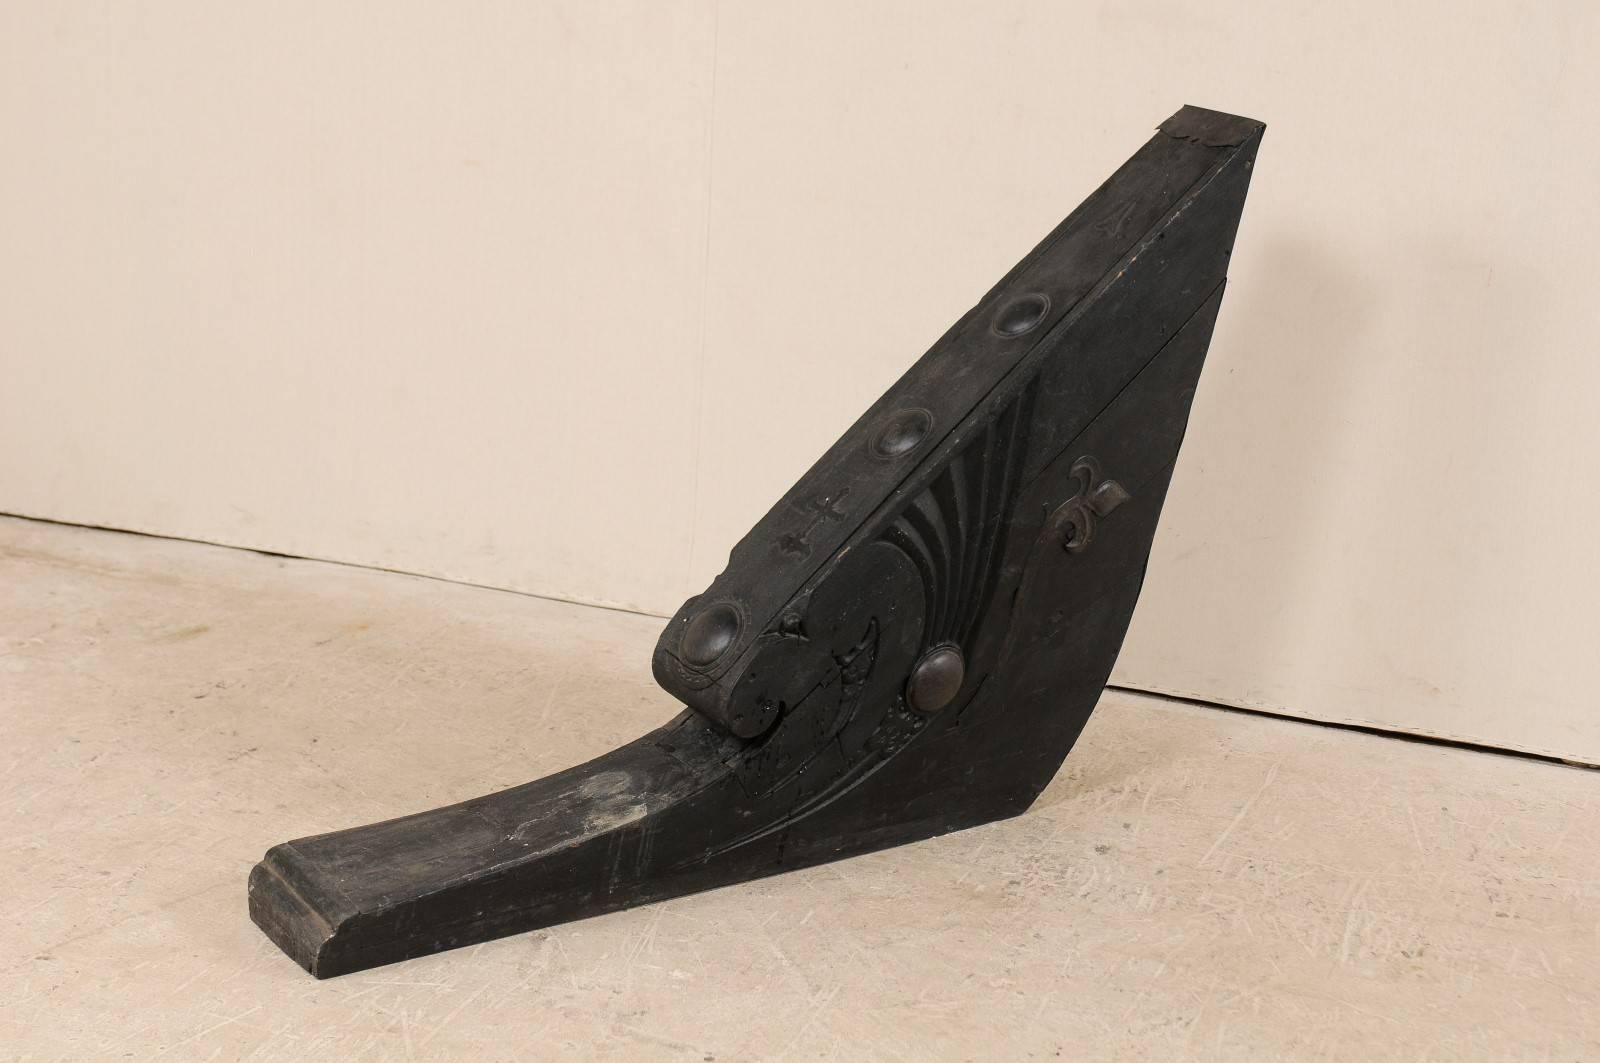 A South Indian (Kerala) wooden boat prow from the mid-20th century. This exquisite example of a hand-carved boat prow from Kerala features a steeply pointed tip, with a tightly curled volute at its upper base area. There is wonderful incised carving